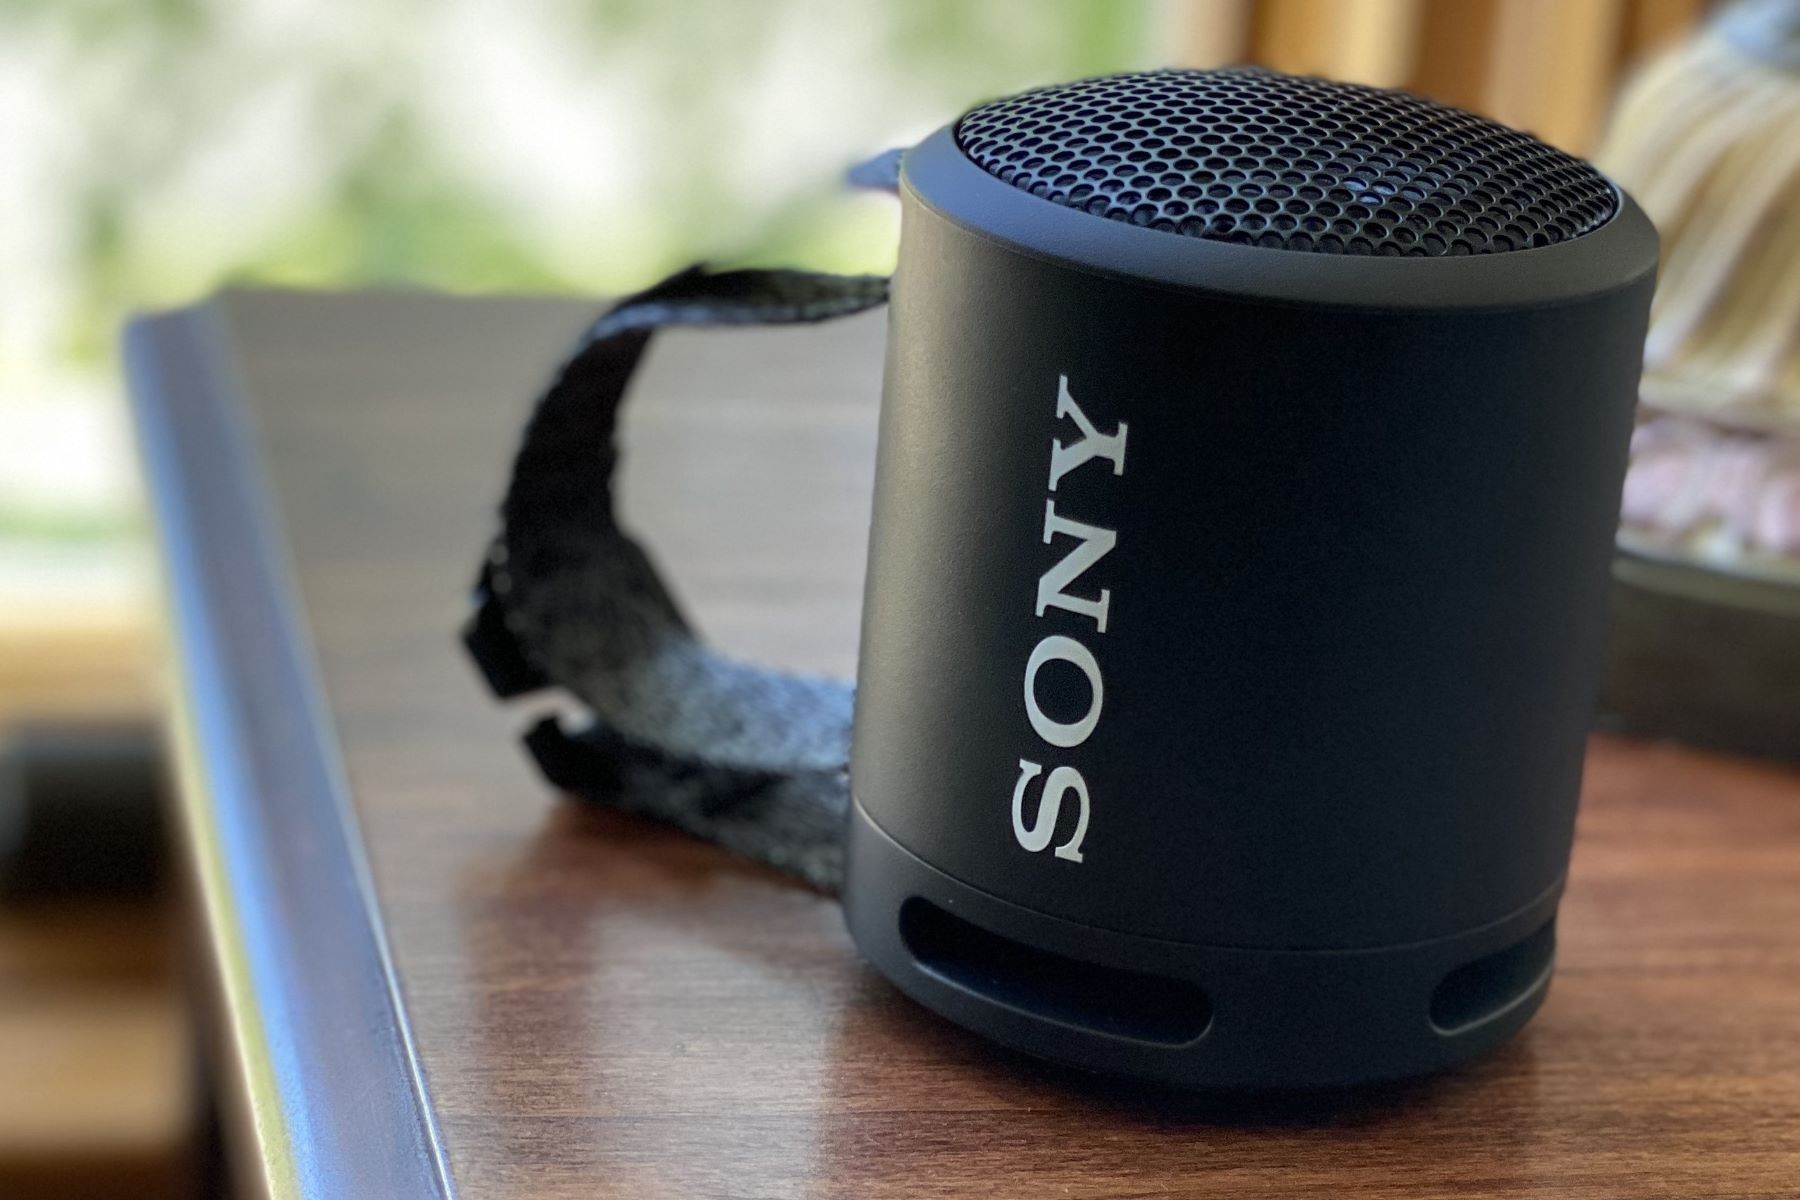 Connecting Your Phone To A Sony Speaker: Step-by-Step